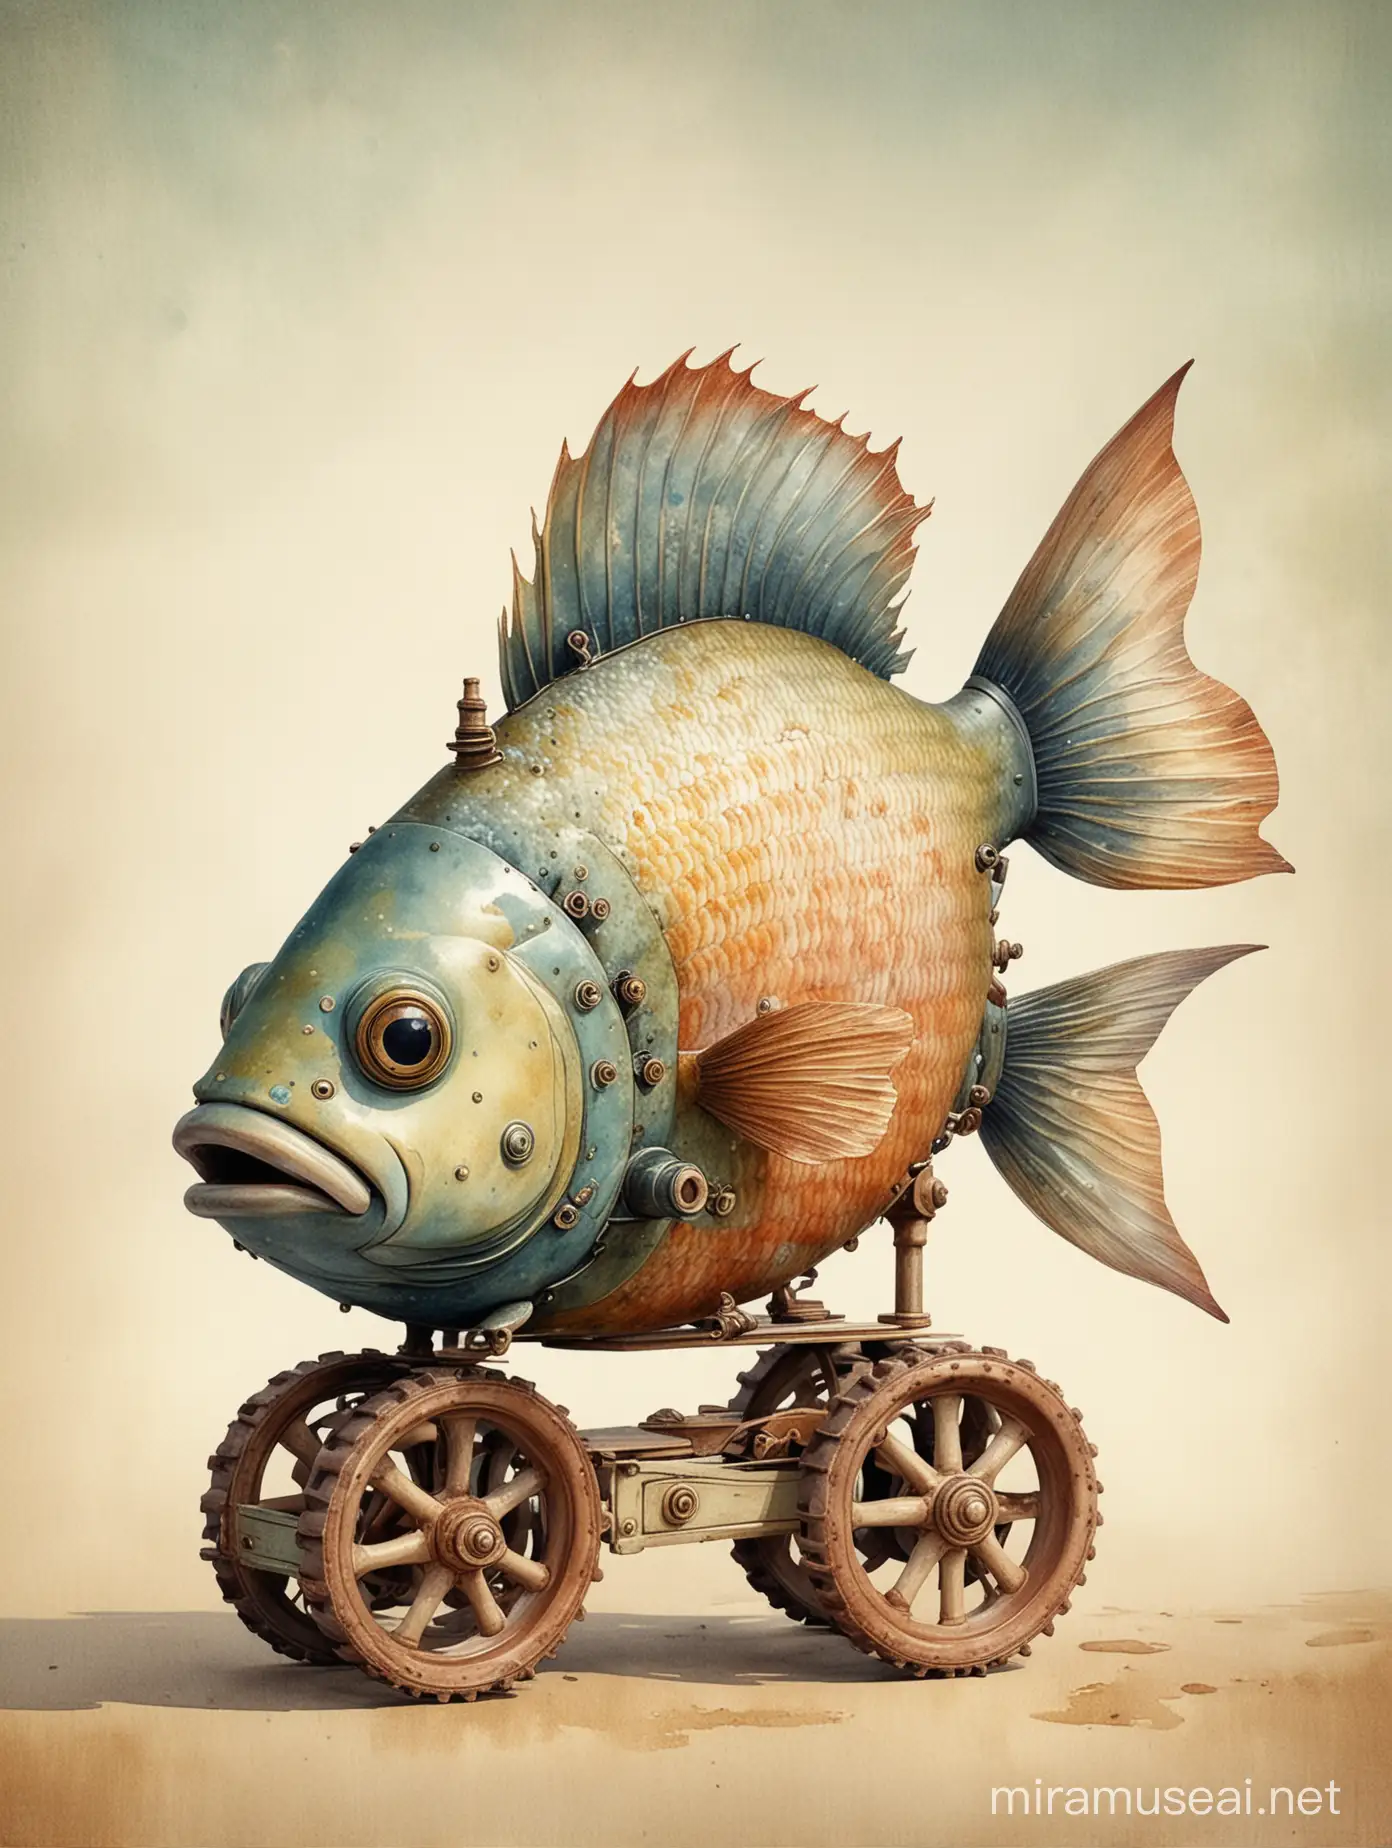 Vintage Watercolor Illustration Fish on Wheels Toy